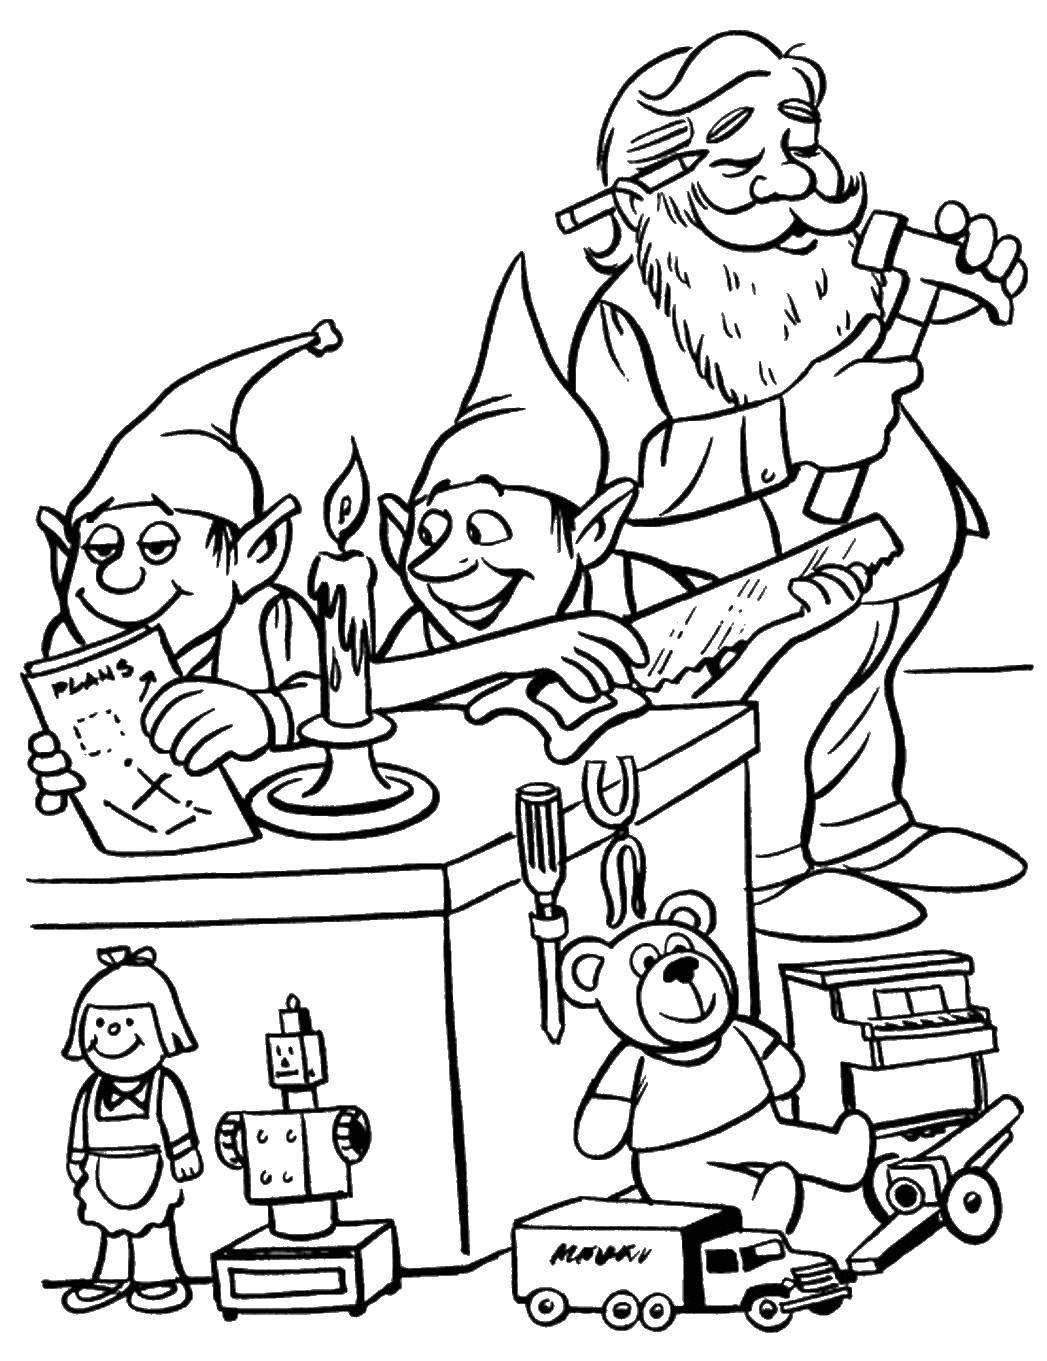 Coloring Santa and the elves. Category Christmas. Tags:  Santa, elves, candles, toys.